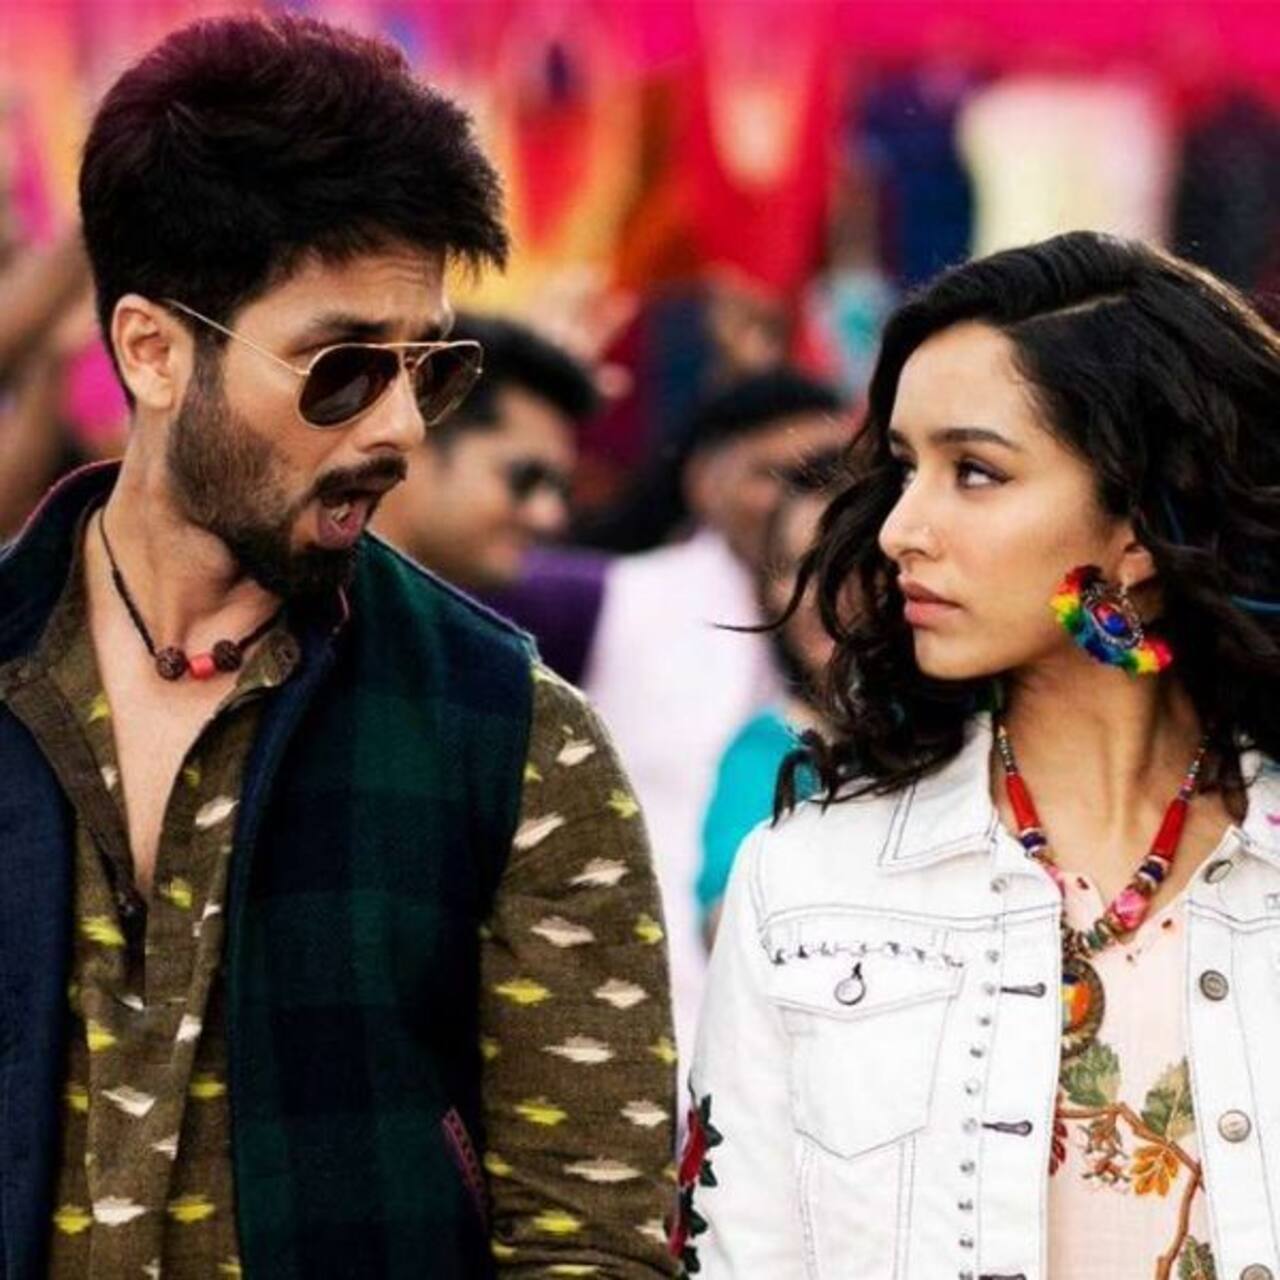 Batti Gul Meter Chalu box office collection day 4: Shahid Kapoor's film witnesses a noticeable dip, earns Rs 26.42 crore